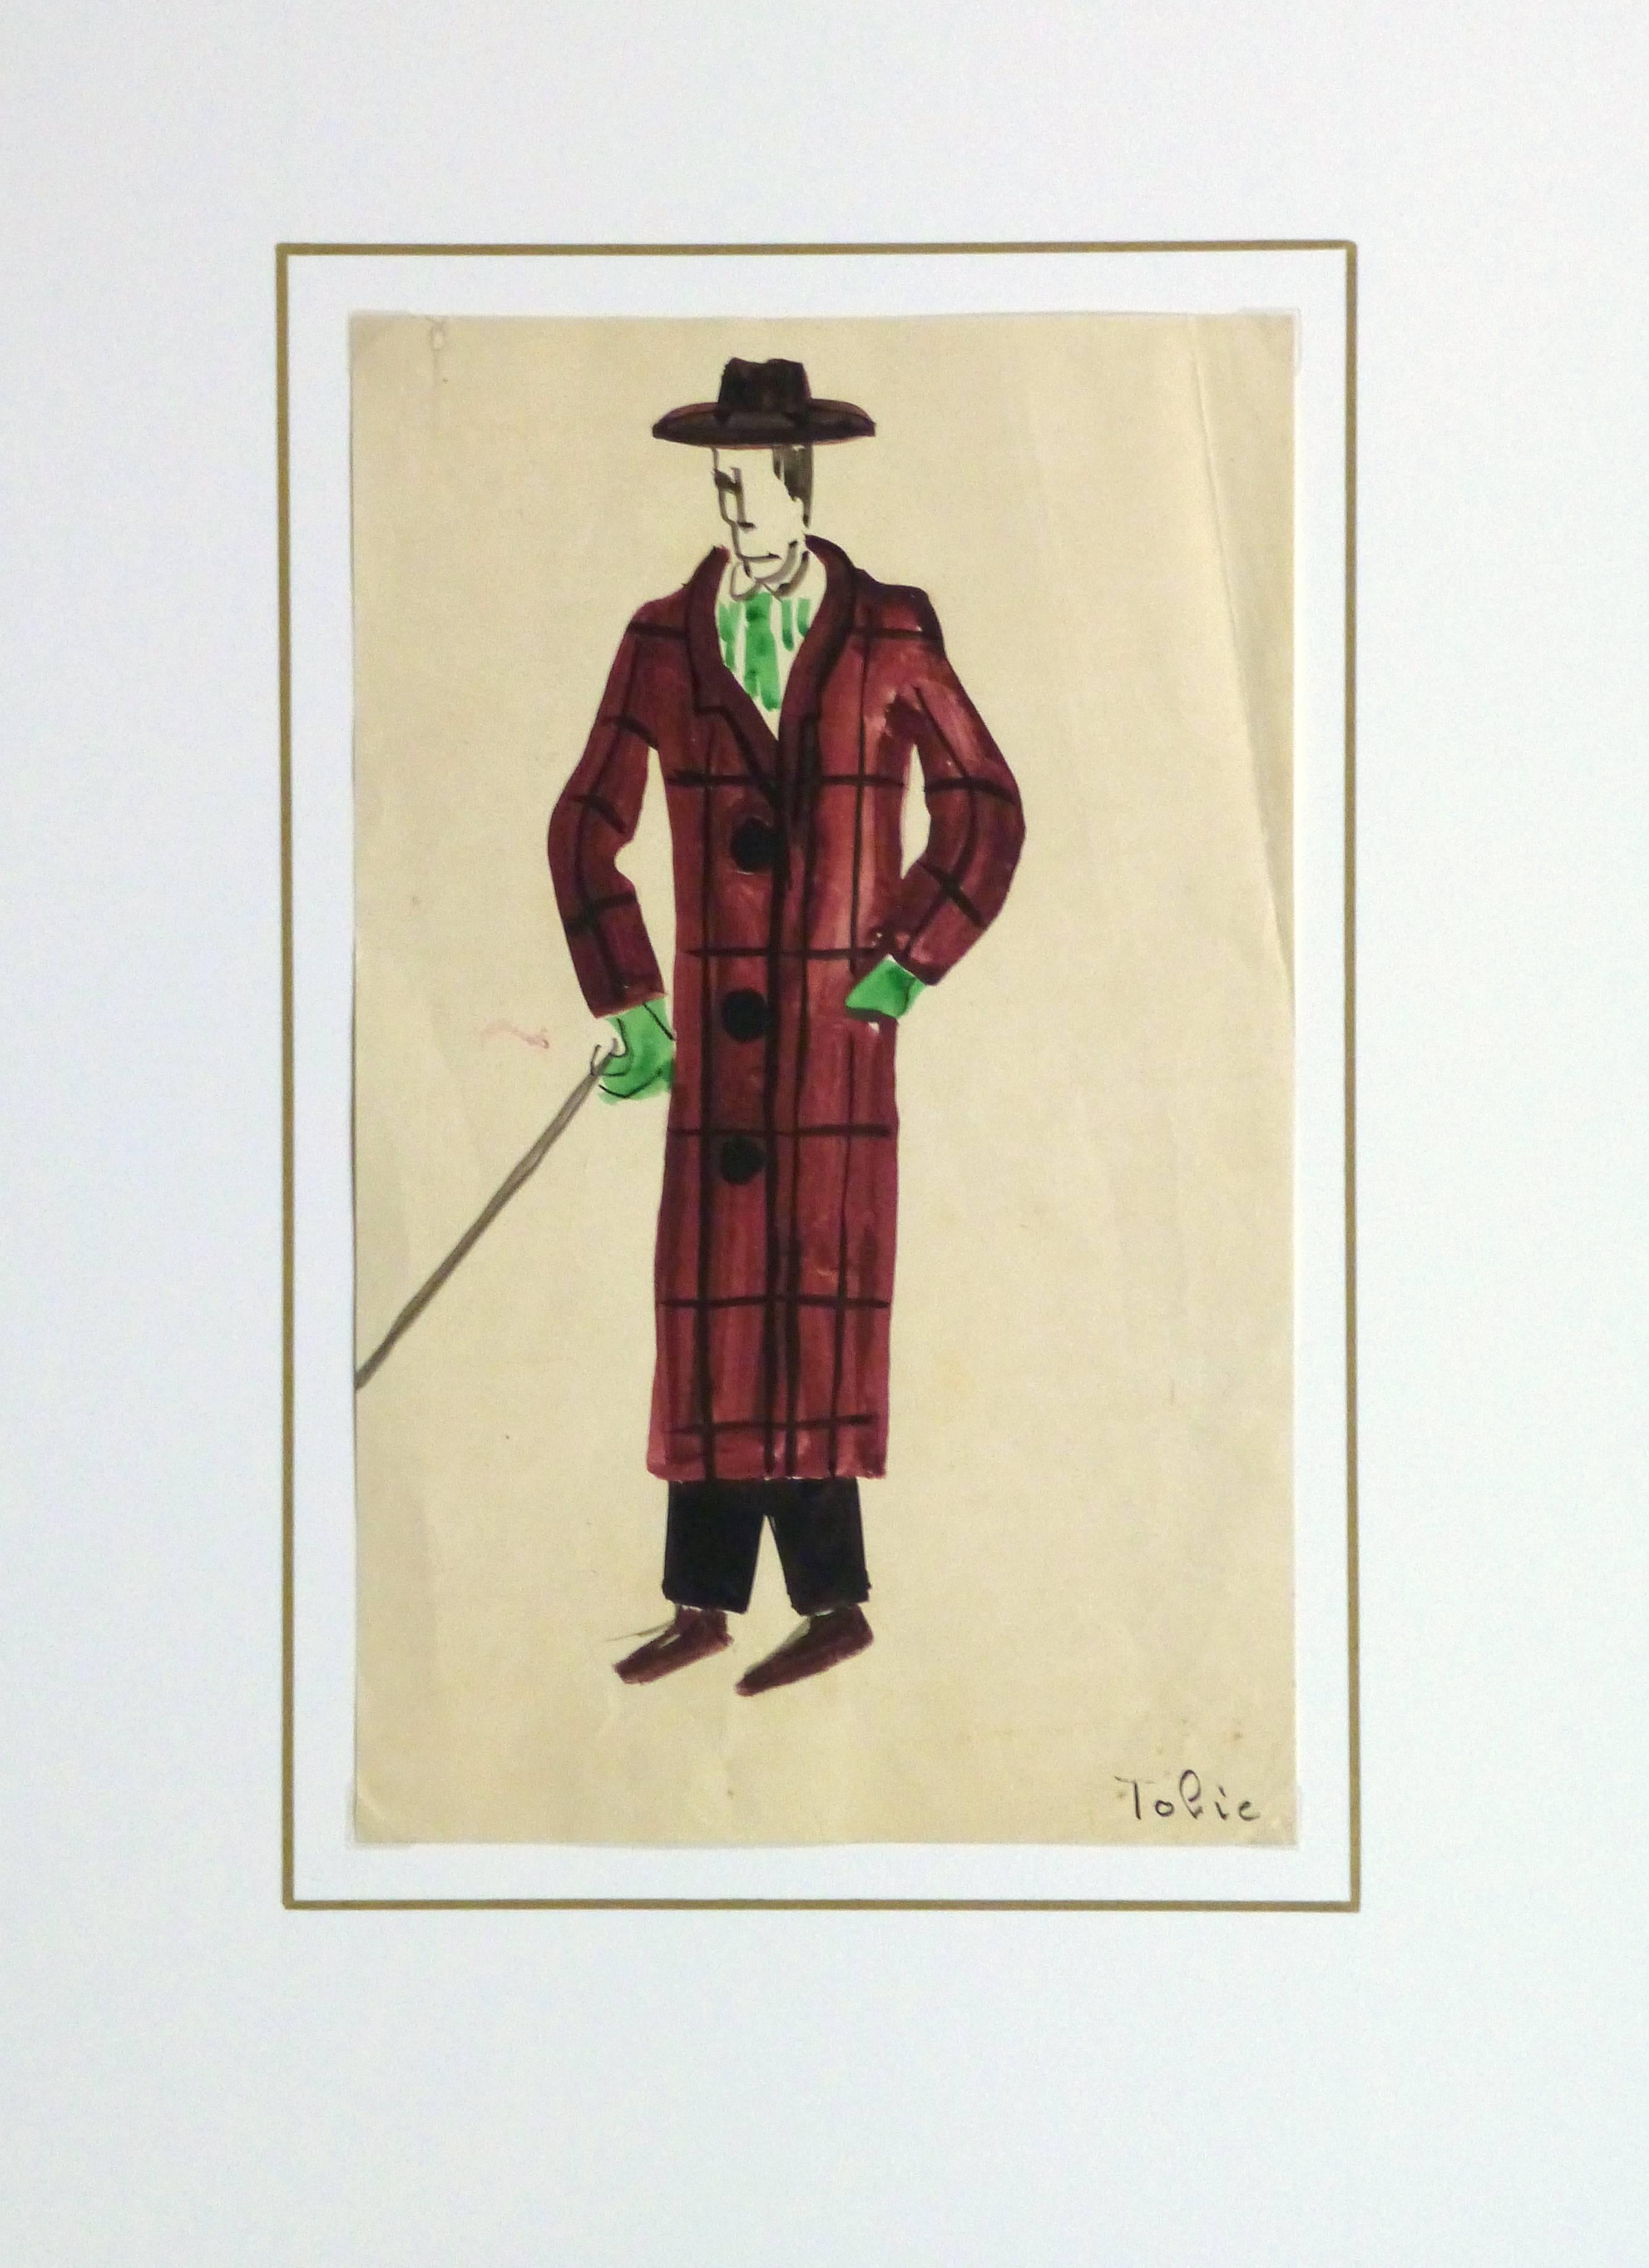 Boldly hued gouache sketch of a male character's costume for a Parisian theater, circa 1920. Reads 